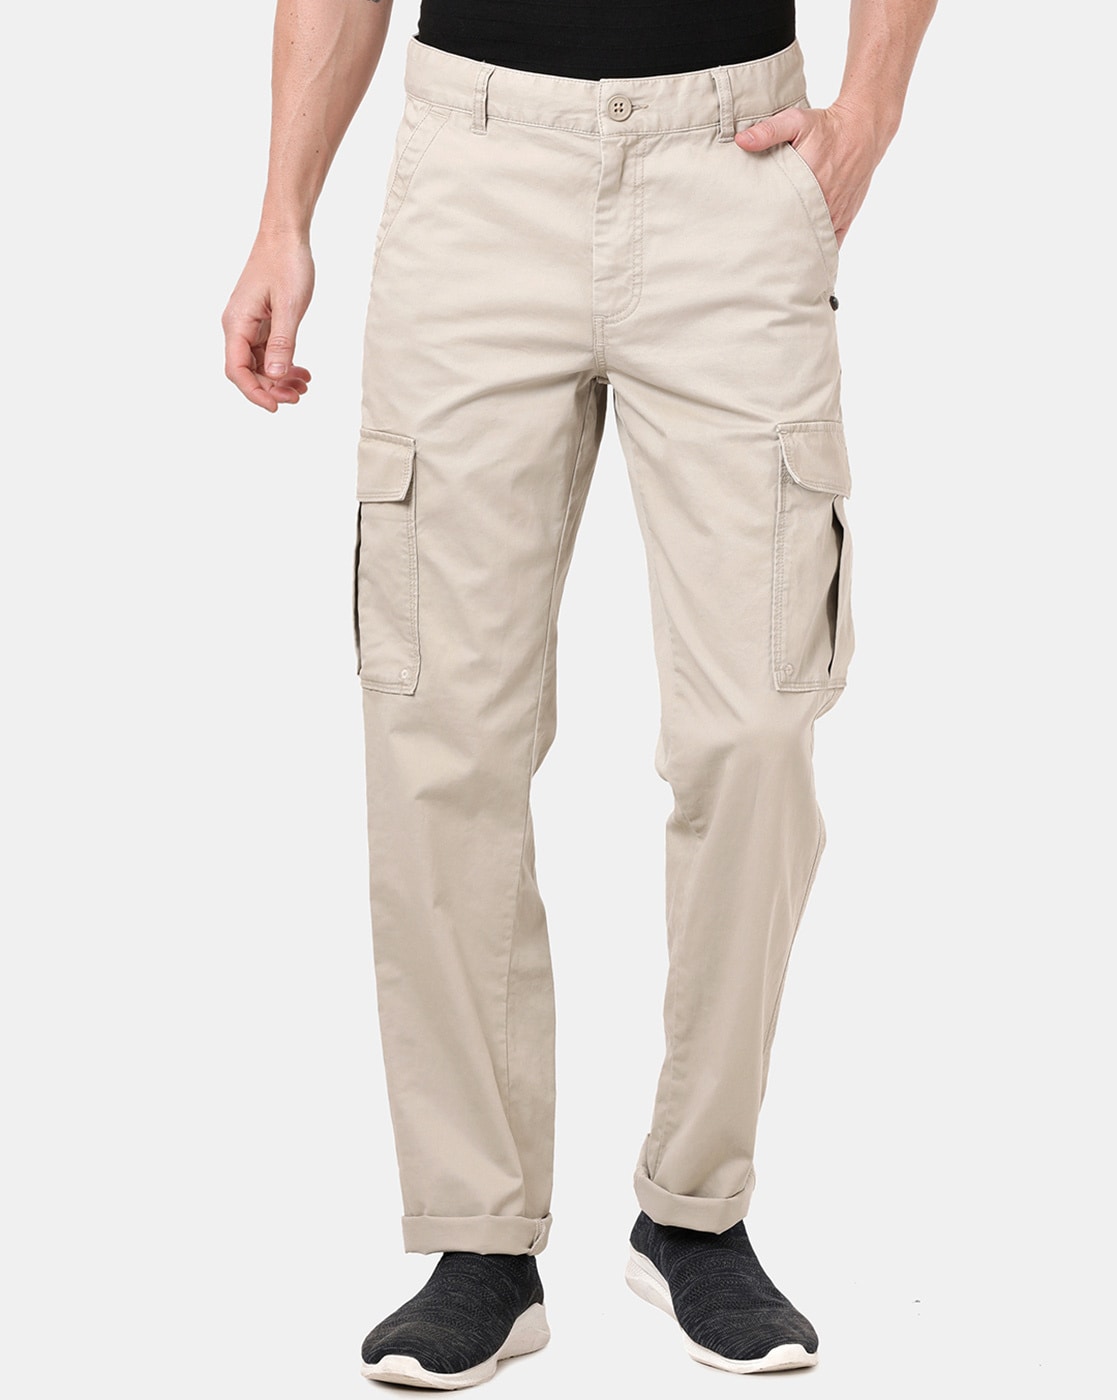 Buy Brown Trousers & Pants for Men by THE NOMHERD Online | Ajio.com